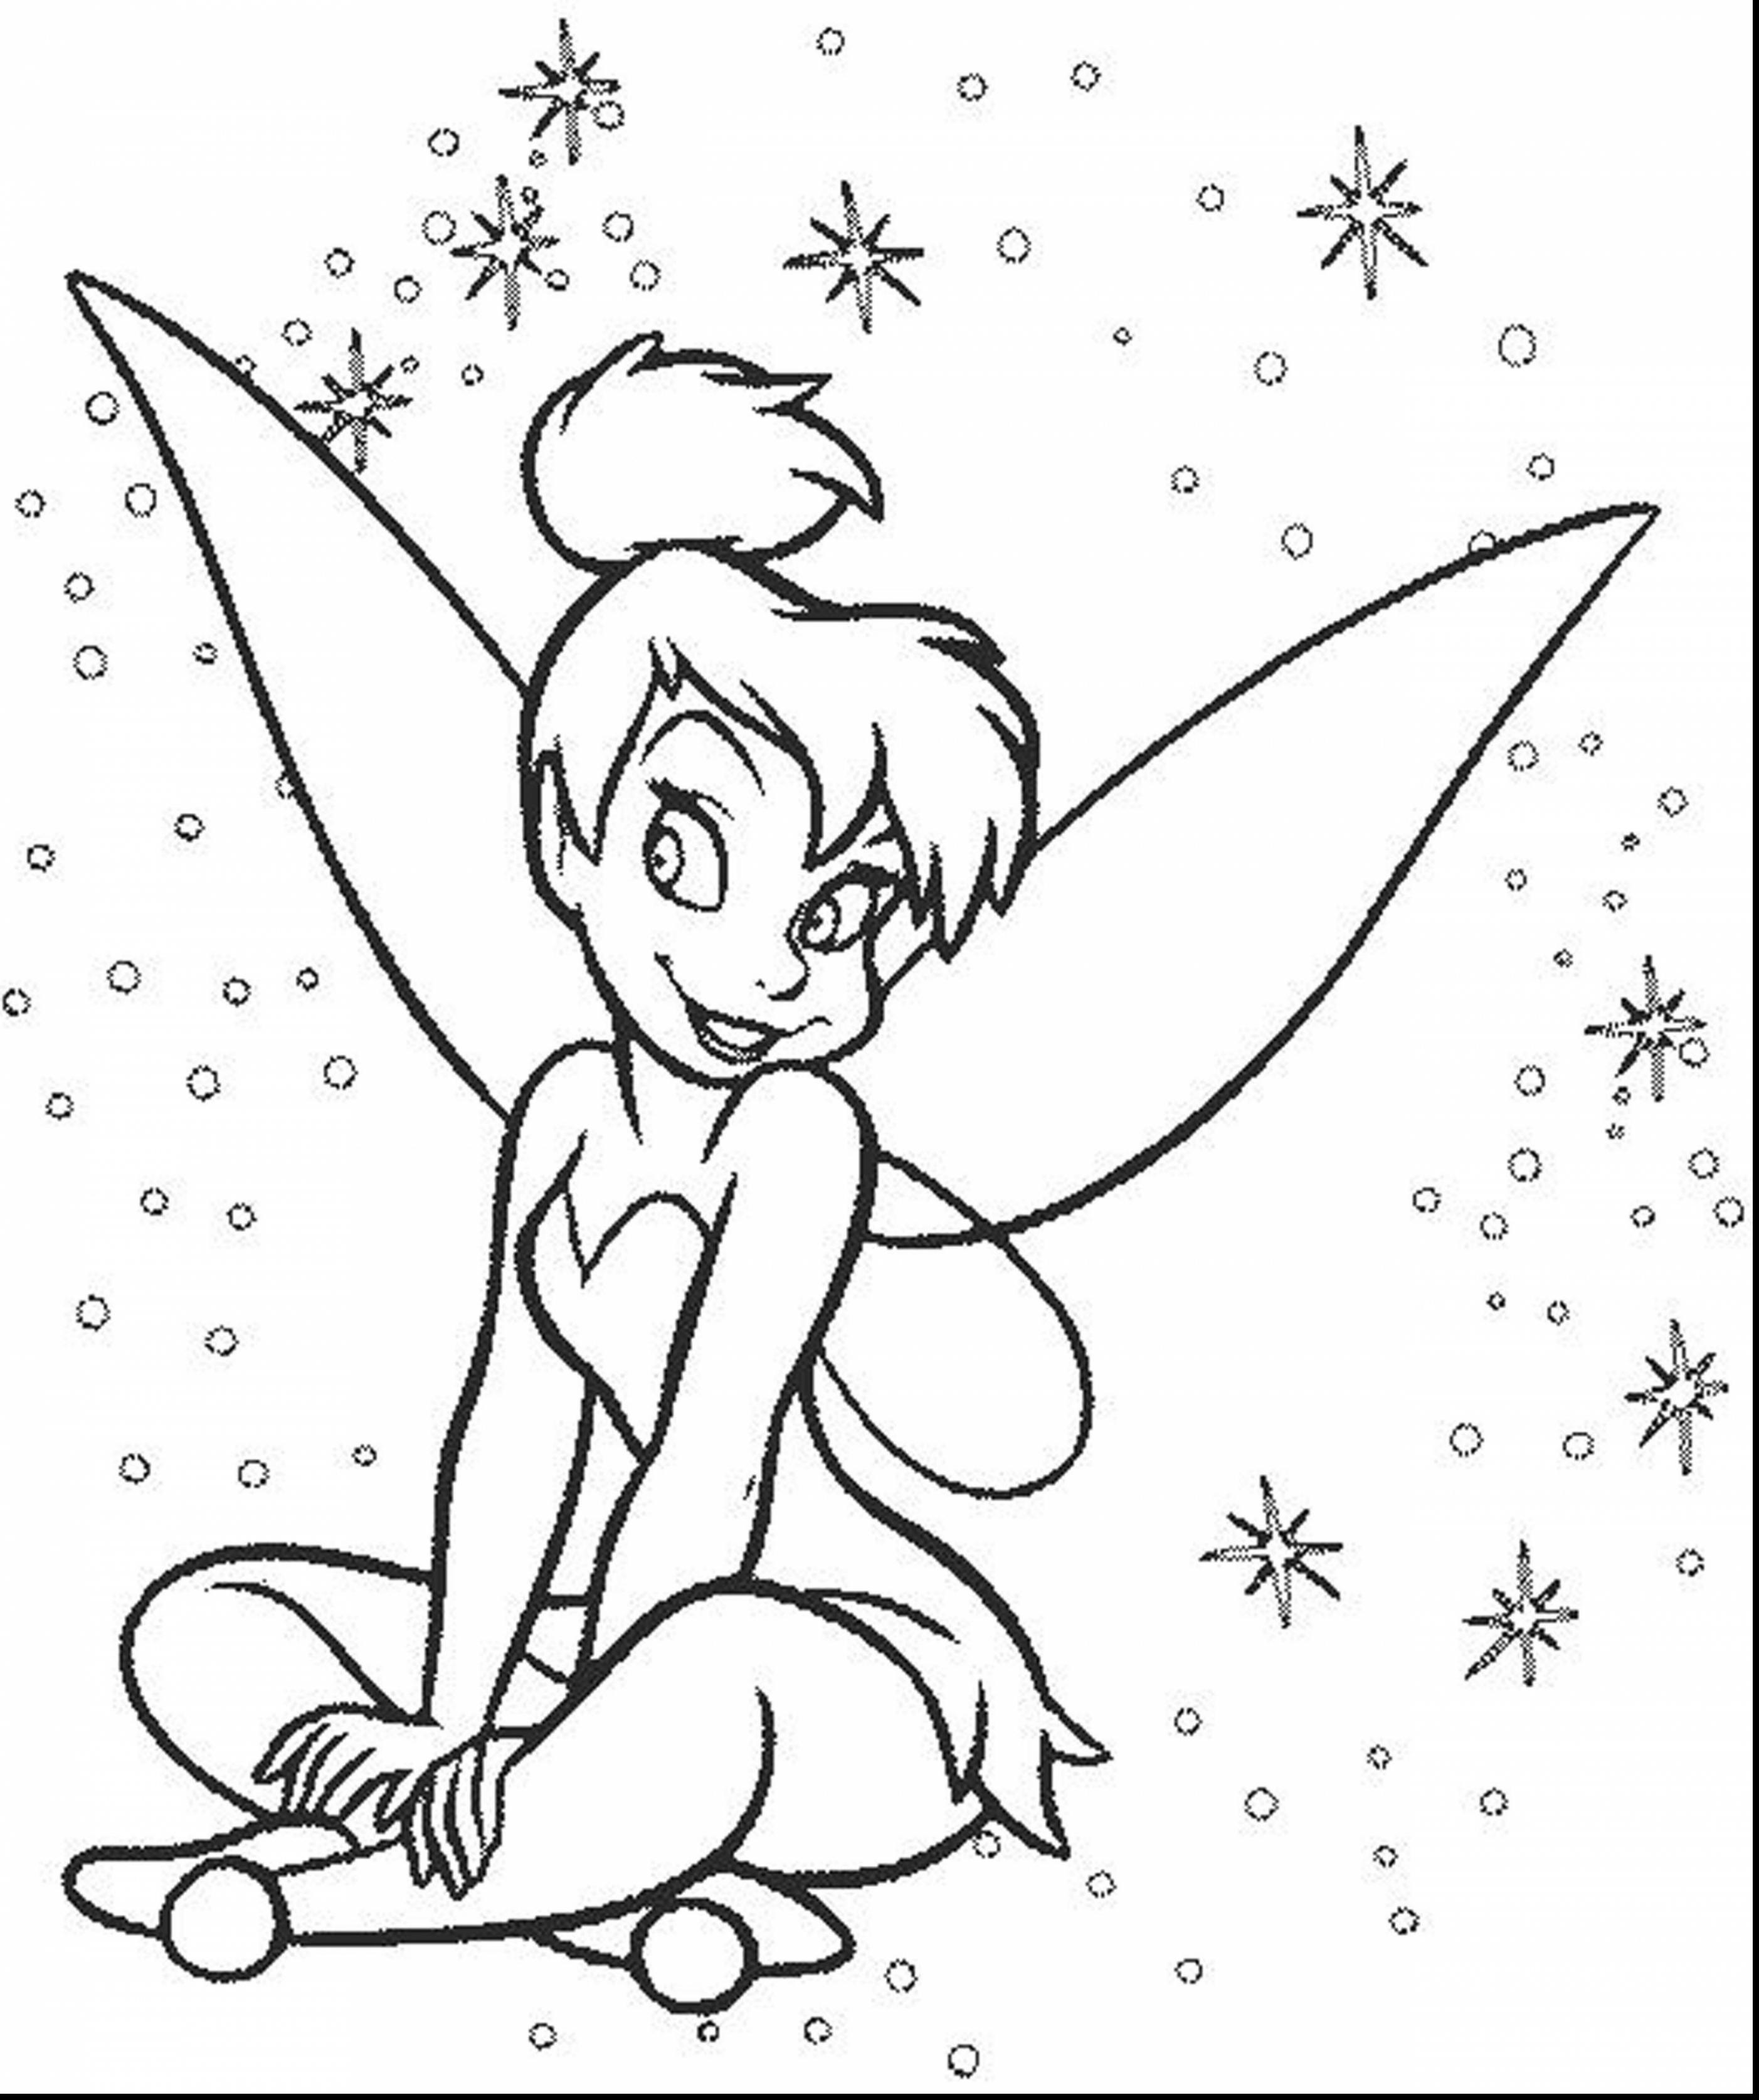 Free Coloring Pages Of Disney Characters at GetDrawings Free download